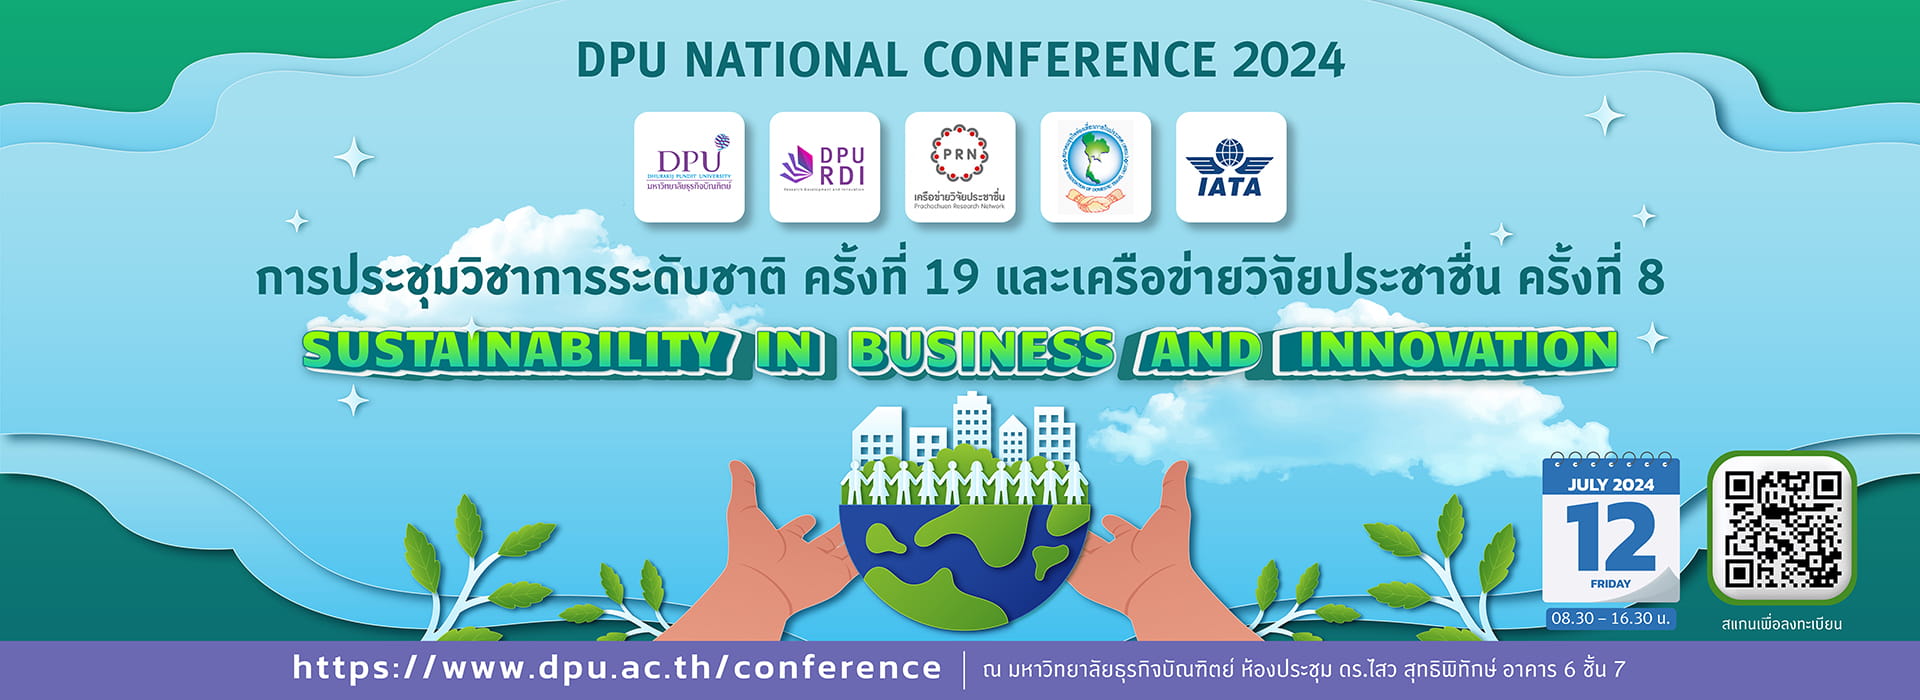 banner conference19